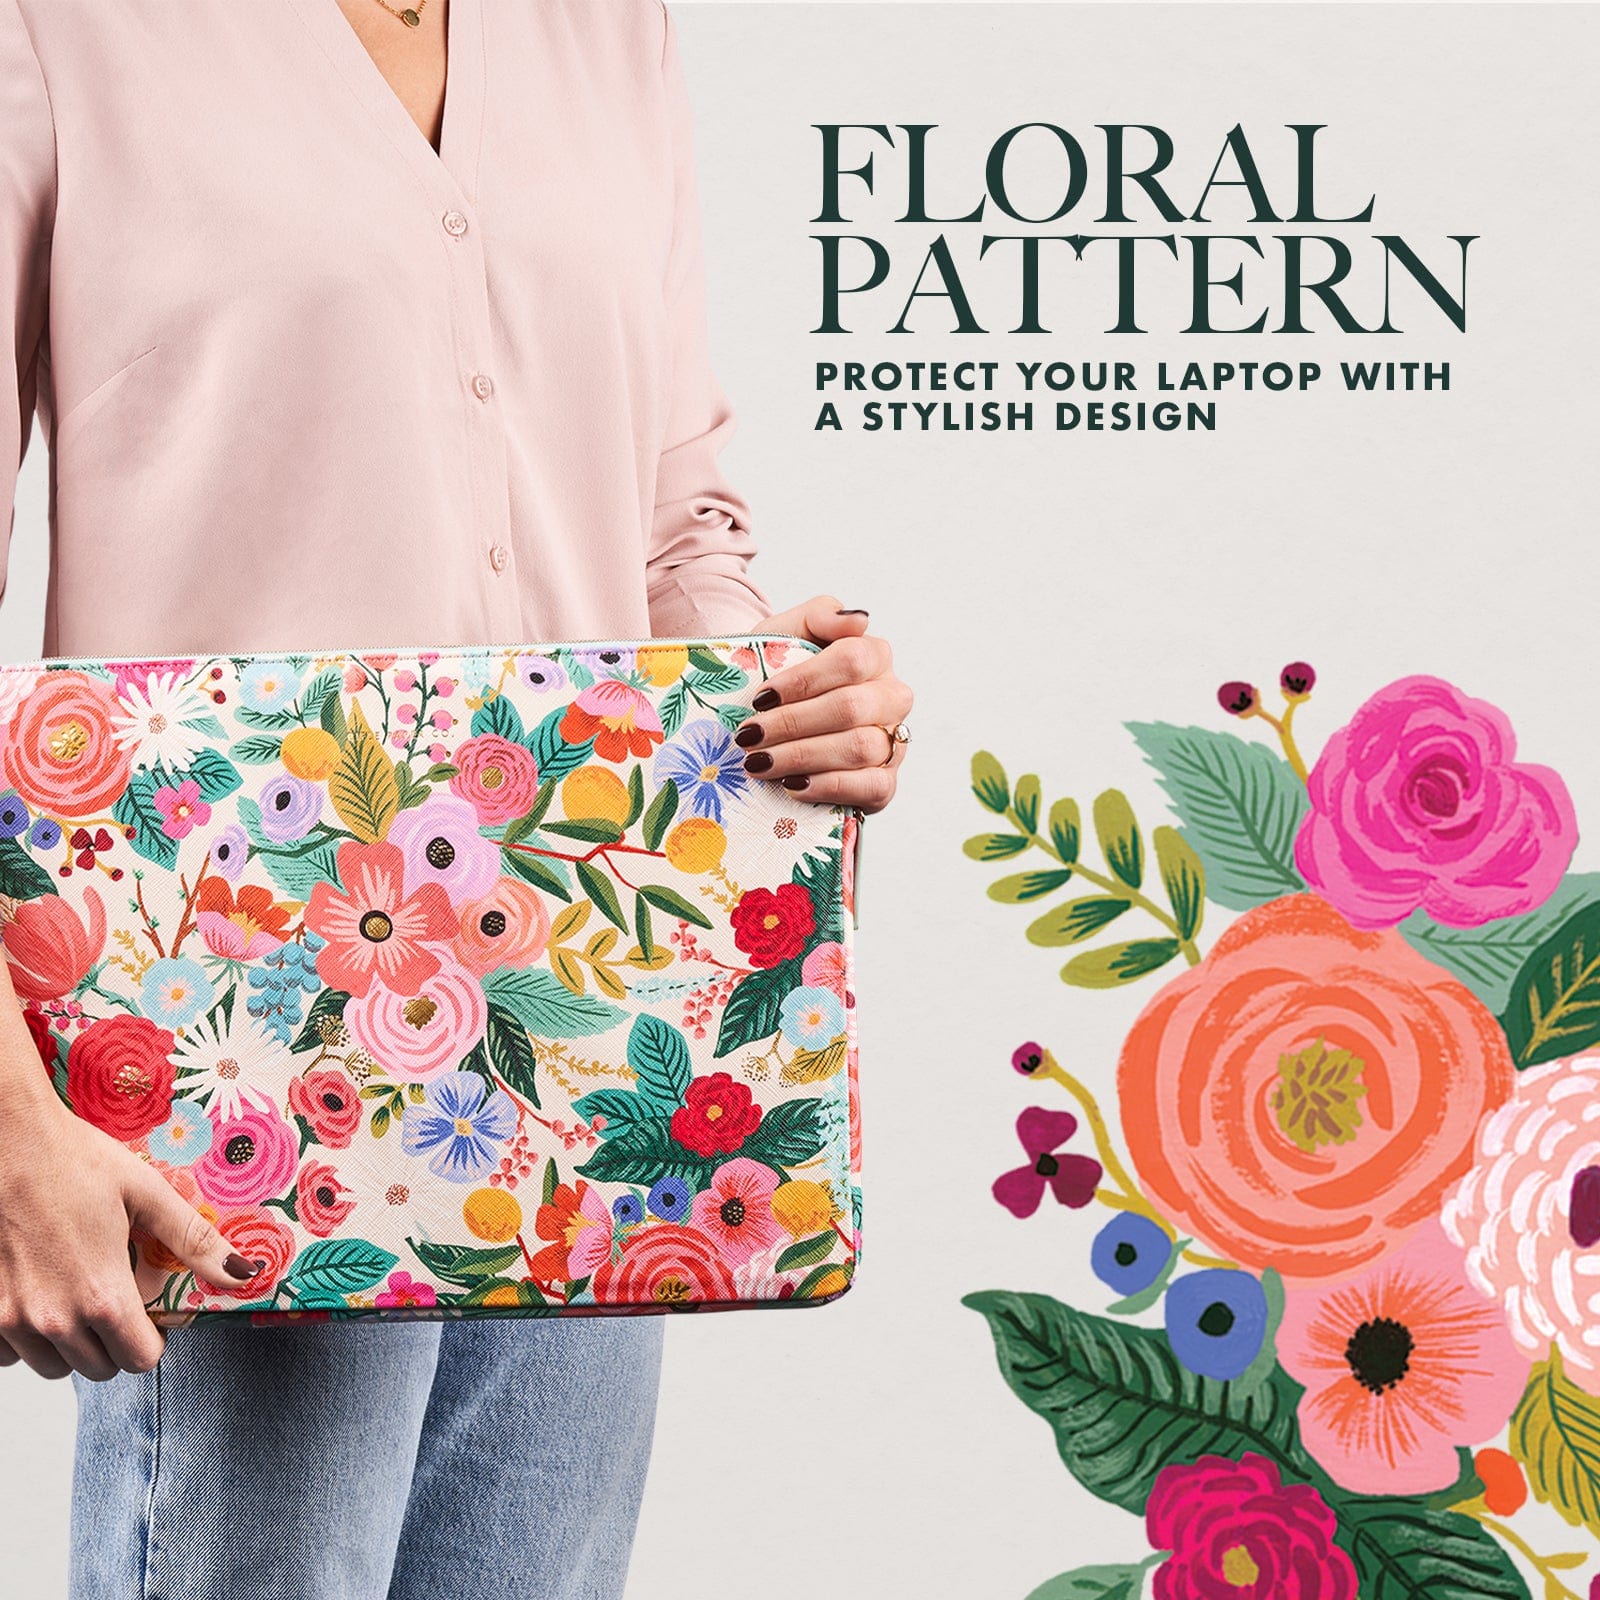 FLORAL PATTERN. PROTECT YOUR LAPTOP WITH A STYLISH DESIGN